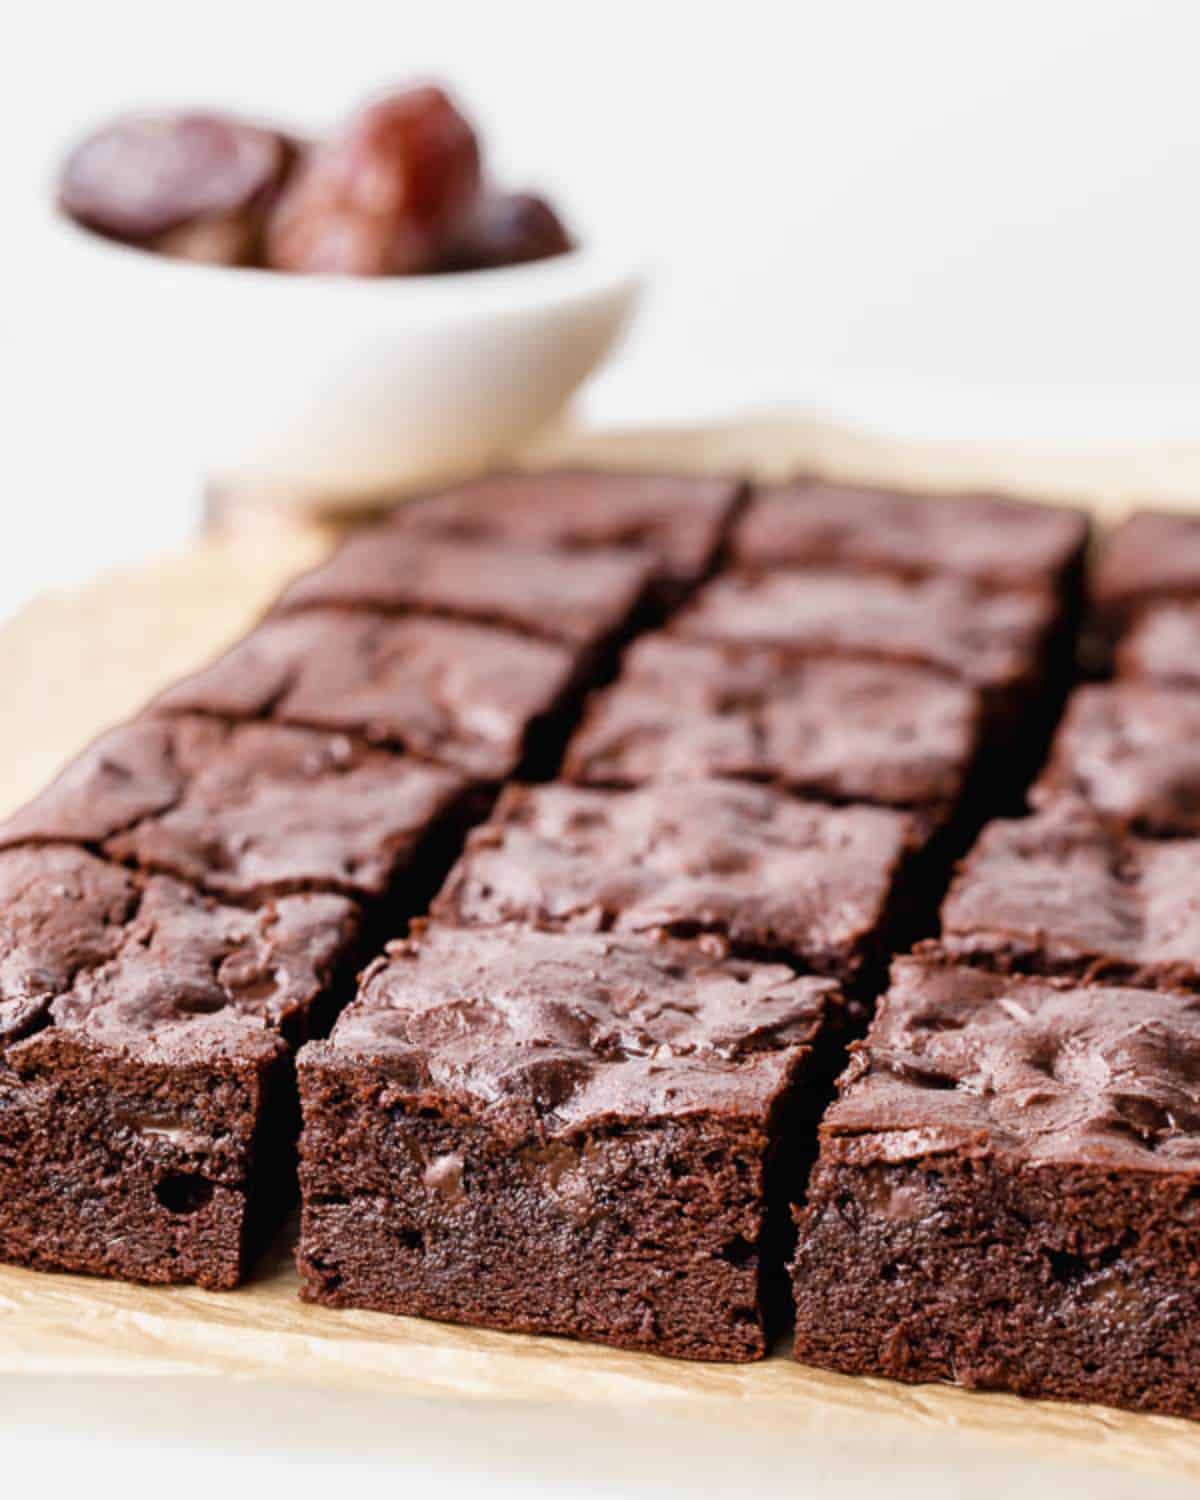 Gluten-Free Chocolate Date Brownies on a wooden tray.